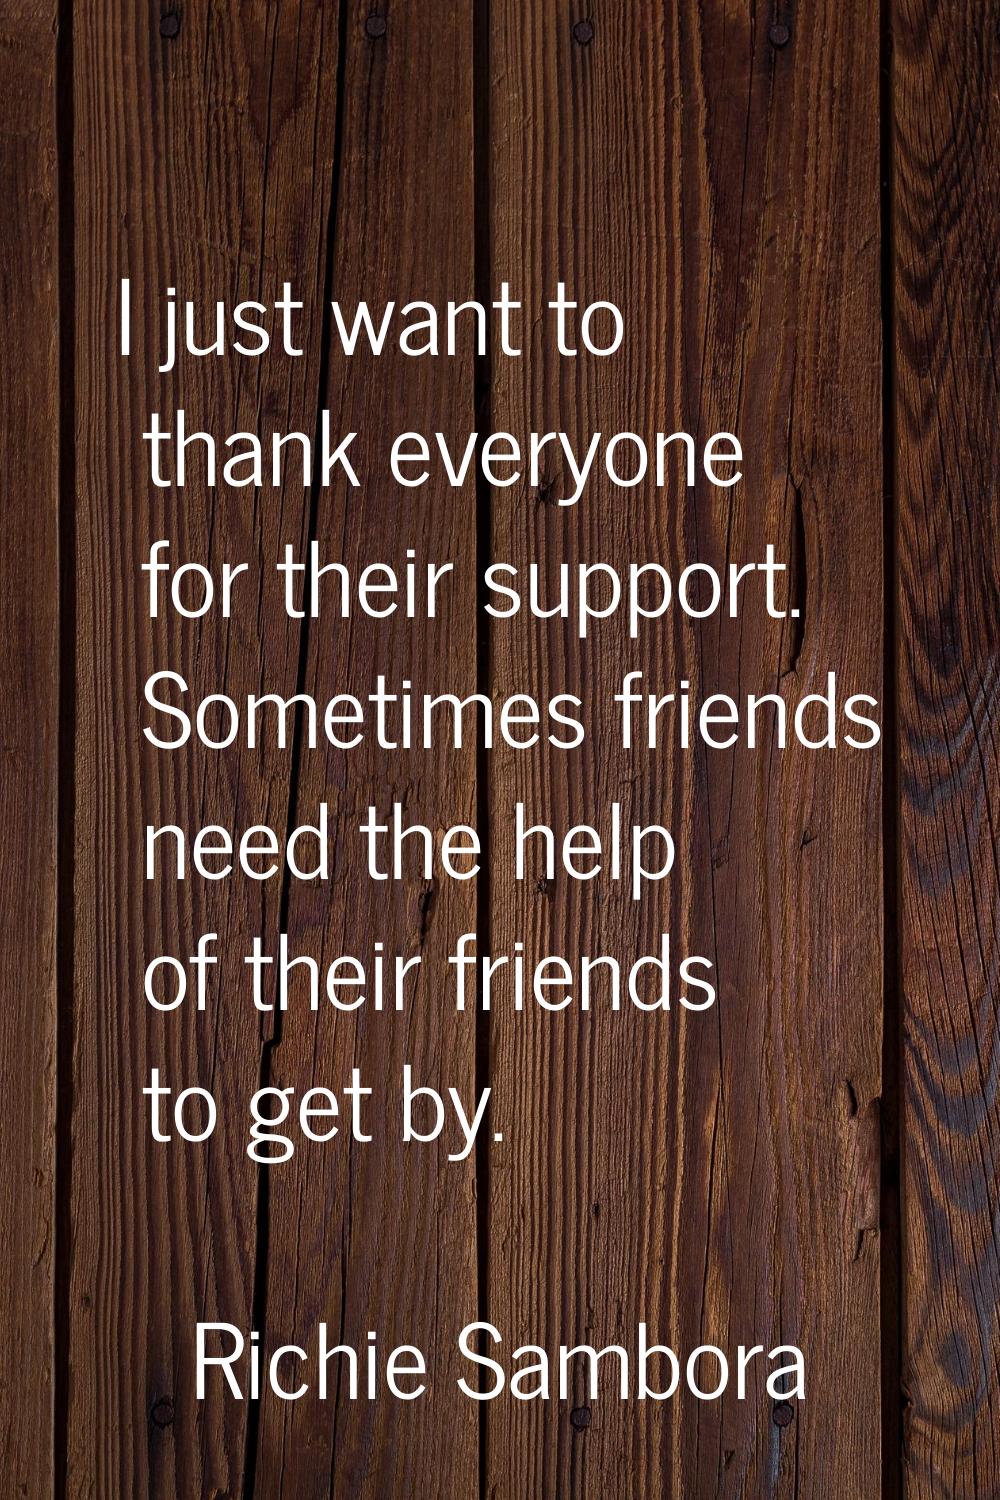 I just want to thank everyone for their support. Sometimes friends need the help of their friends t